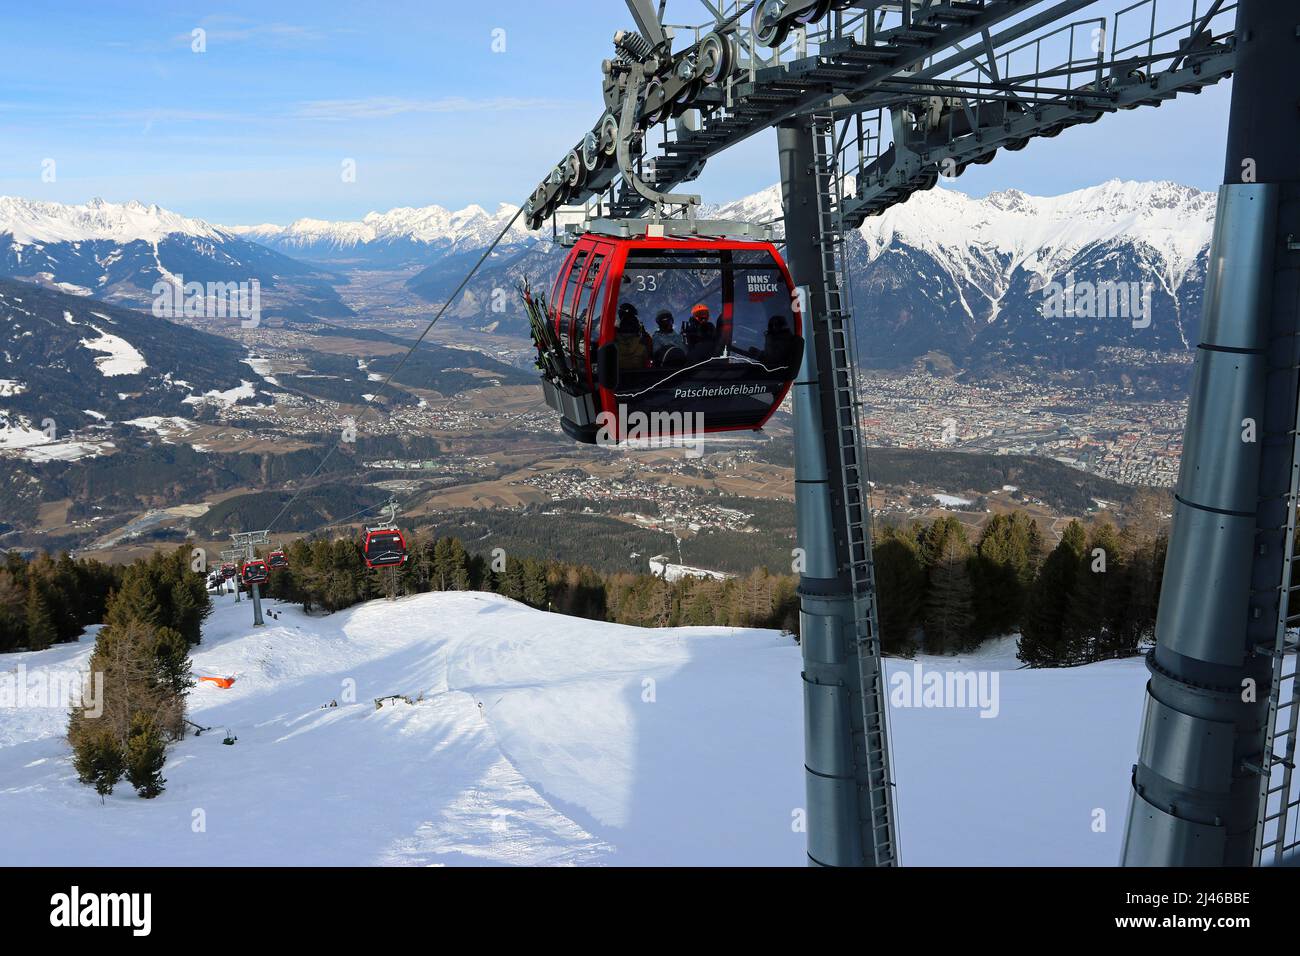 The Patscherkofelbahn cable car approaches the Bergstation; Innsbruck spreads out along the Inn valley below; Nordkette mountain range behind Stock Photo